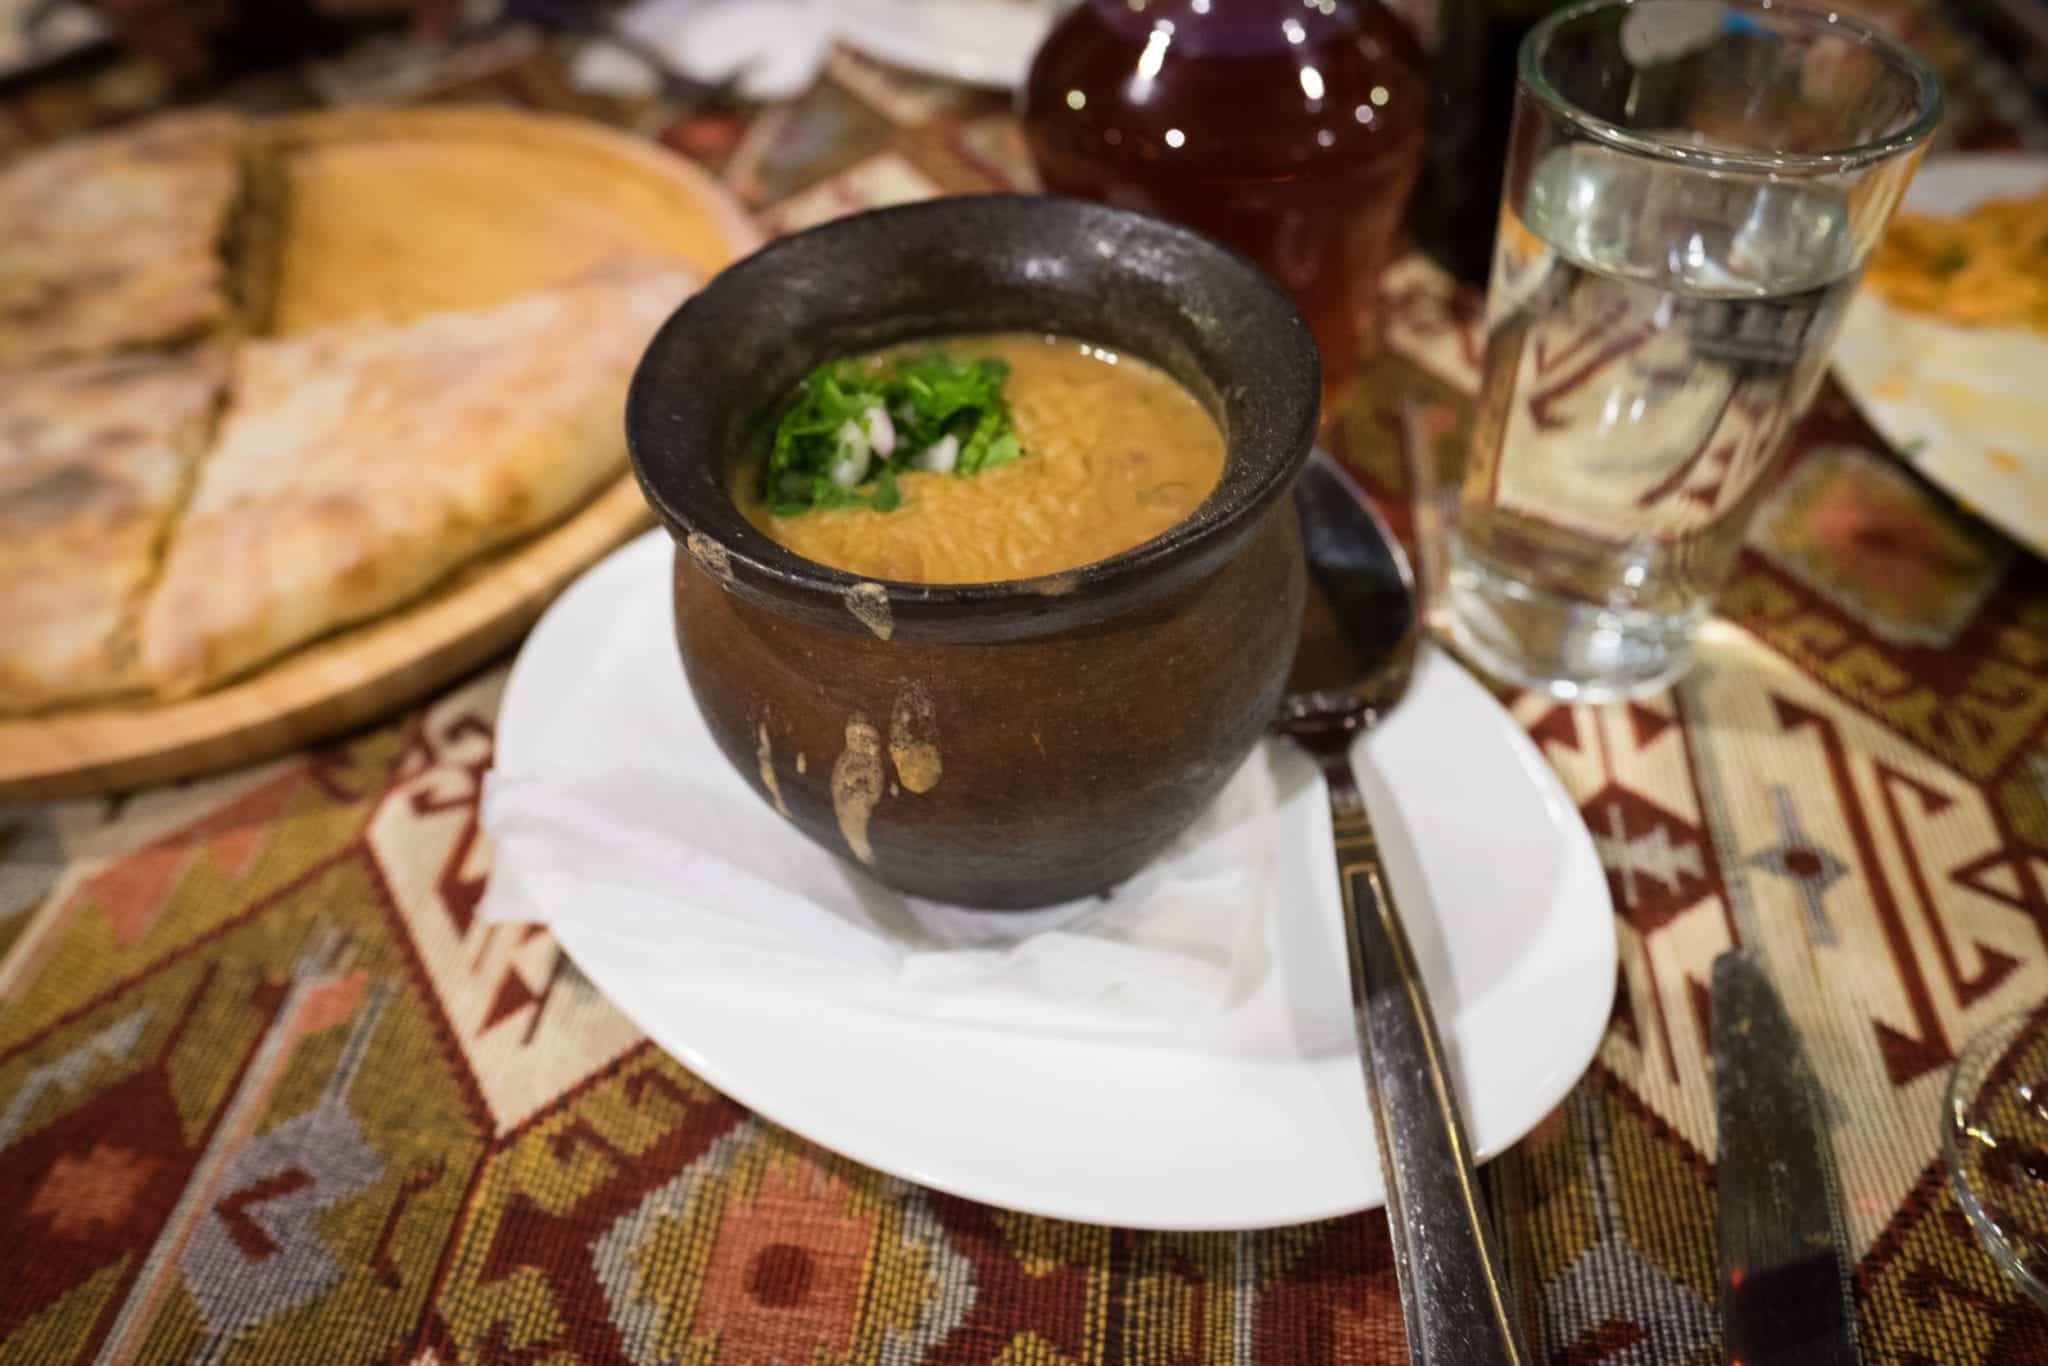 A dark brown vase-like bowl filled with lobio, Georgian stewed beans, sitting on a white plate.